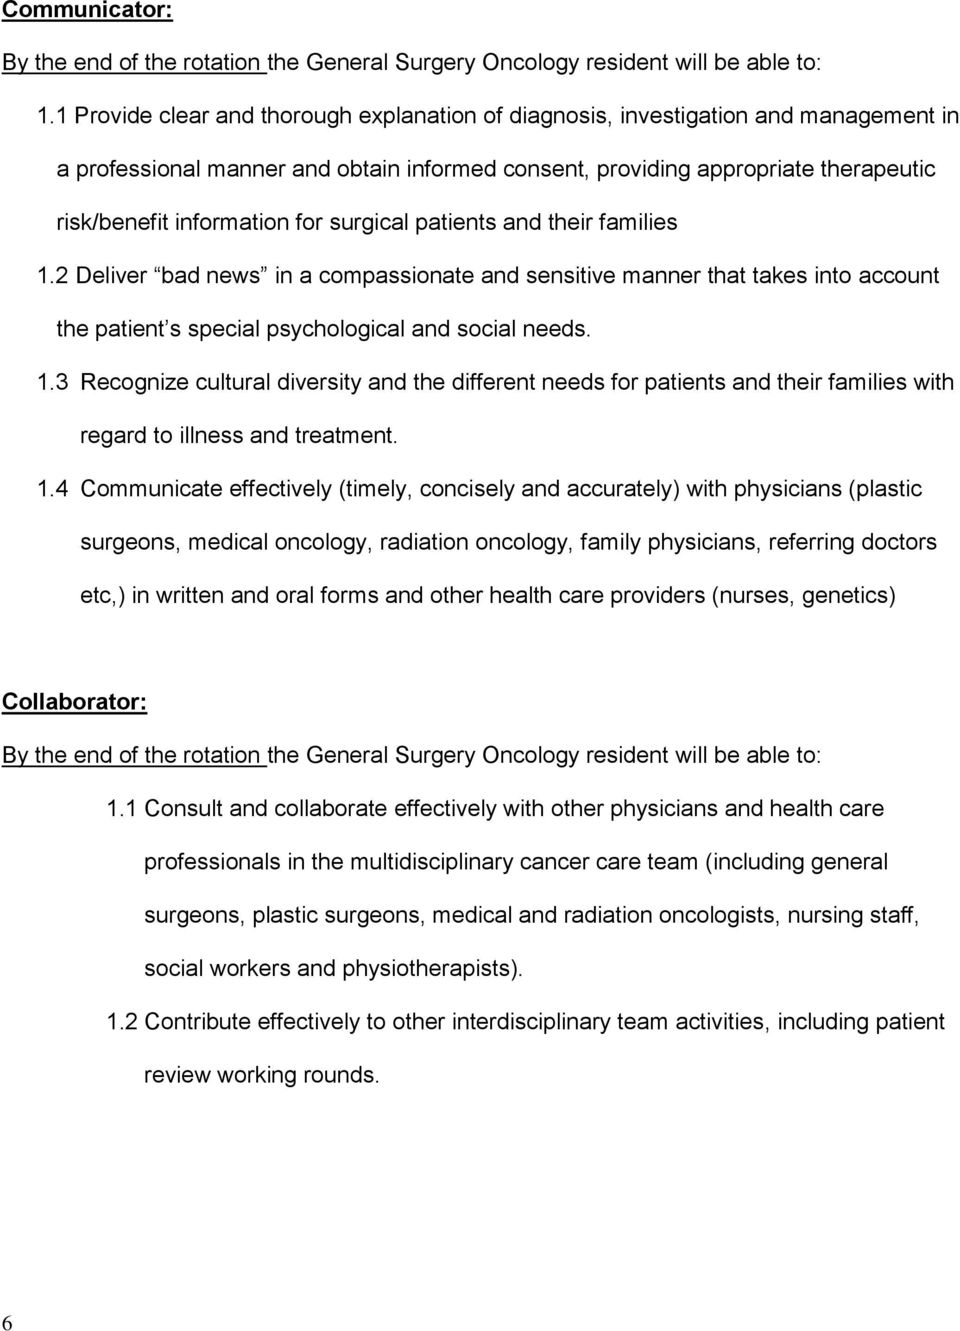 for surgical patients and their families 1.2 Deliver bad news in a compassionate and sensitive manner that takes into account the patient s special psychological and social needs. 1.3 Recognize cultural diversity and the different needs for patients and their families with regard to illness and treatment.